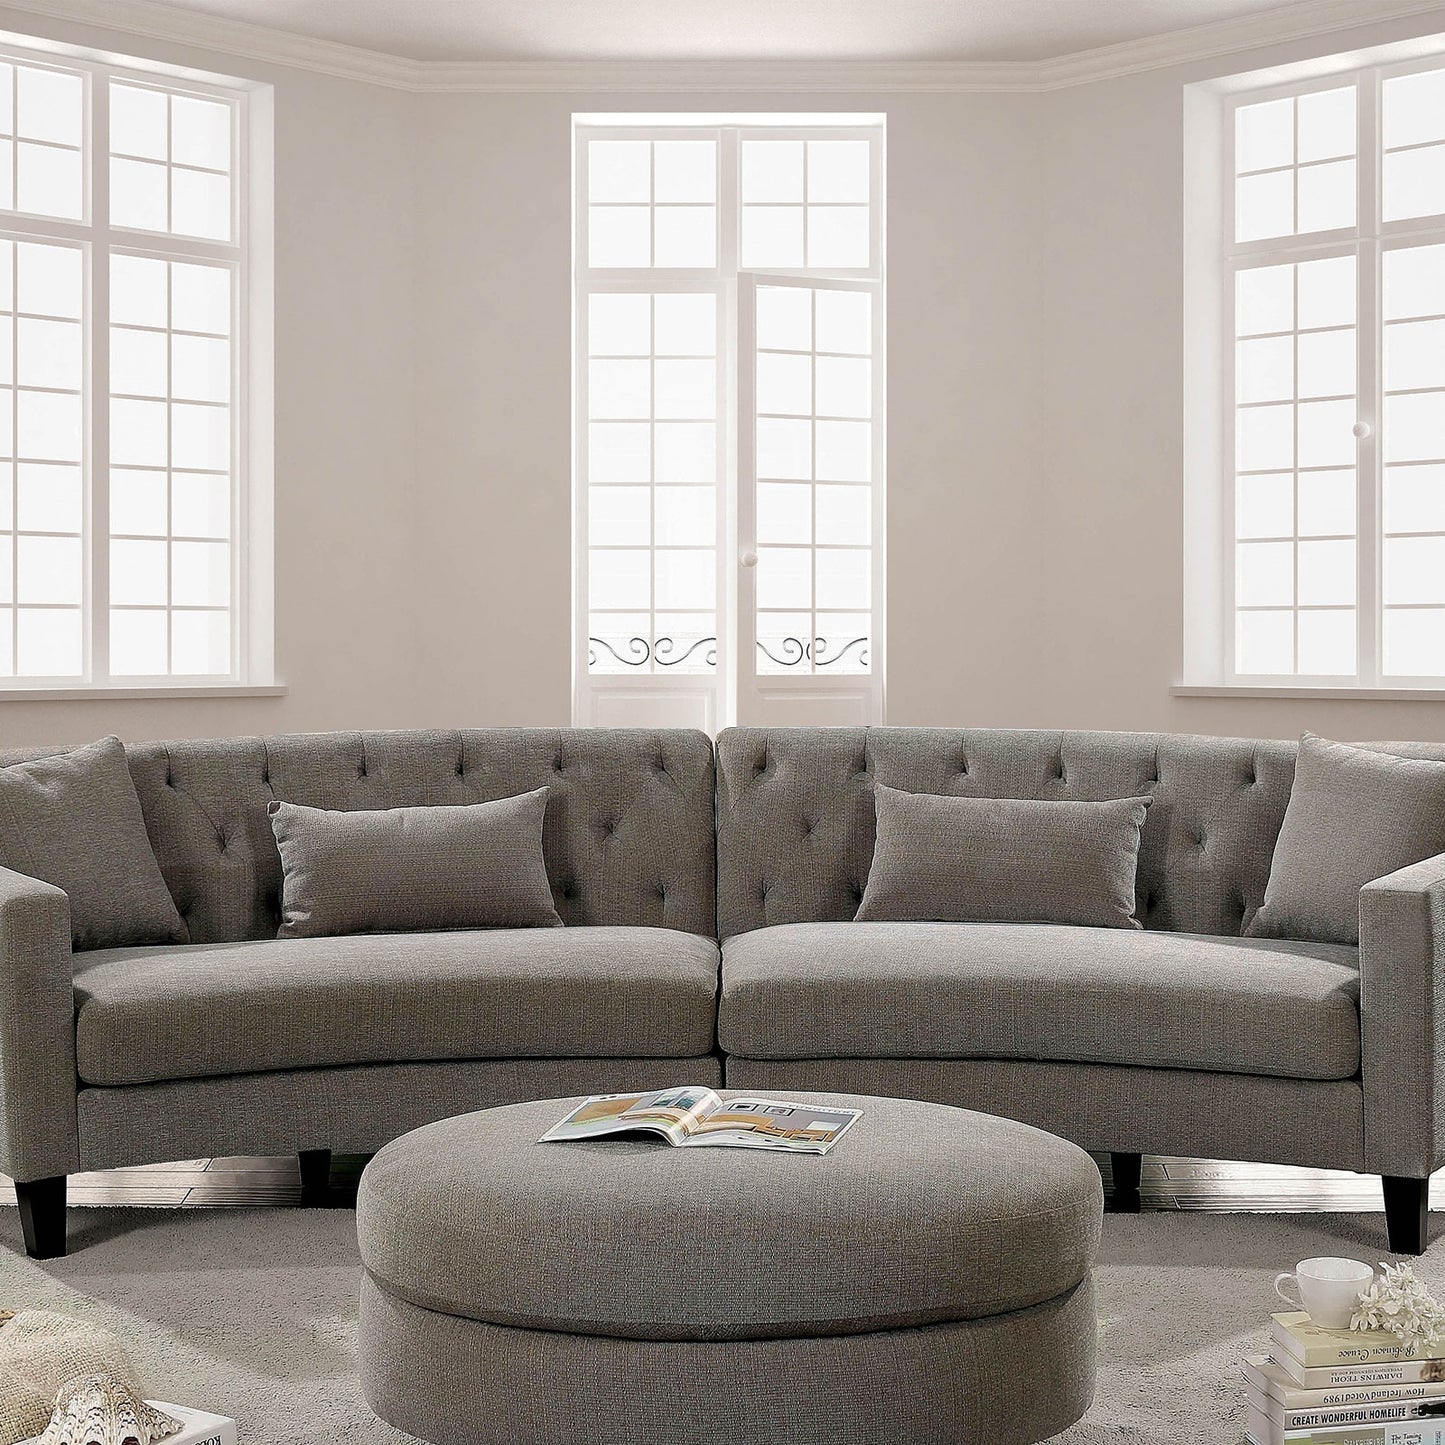 Sarin Warm Grey Tufted Linen Tight Back Sectional